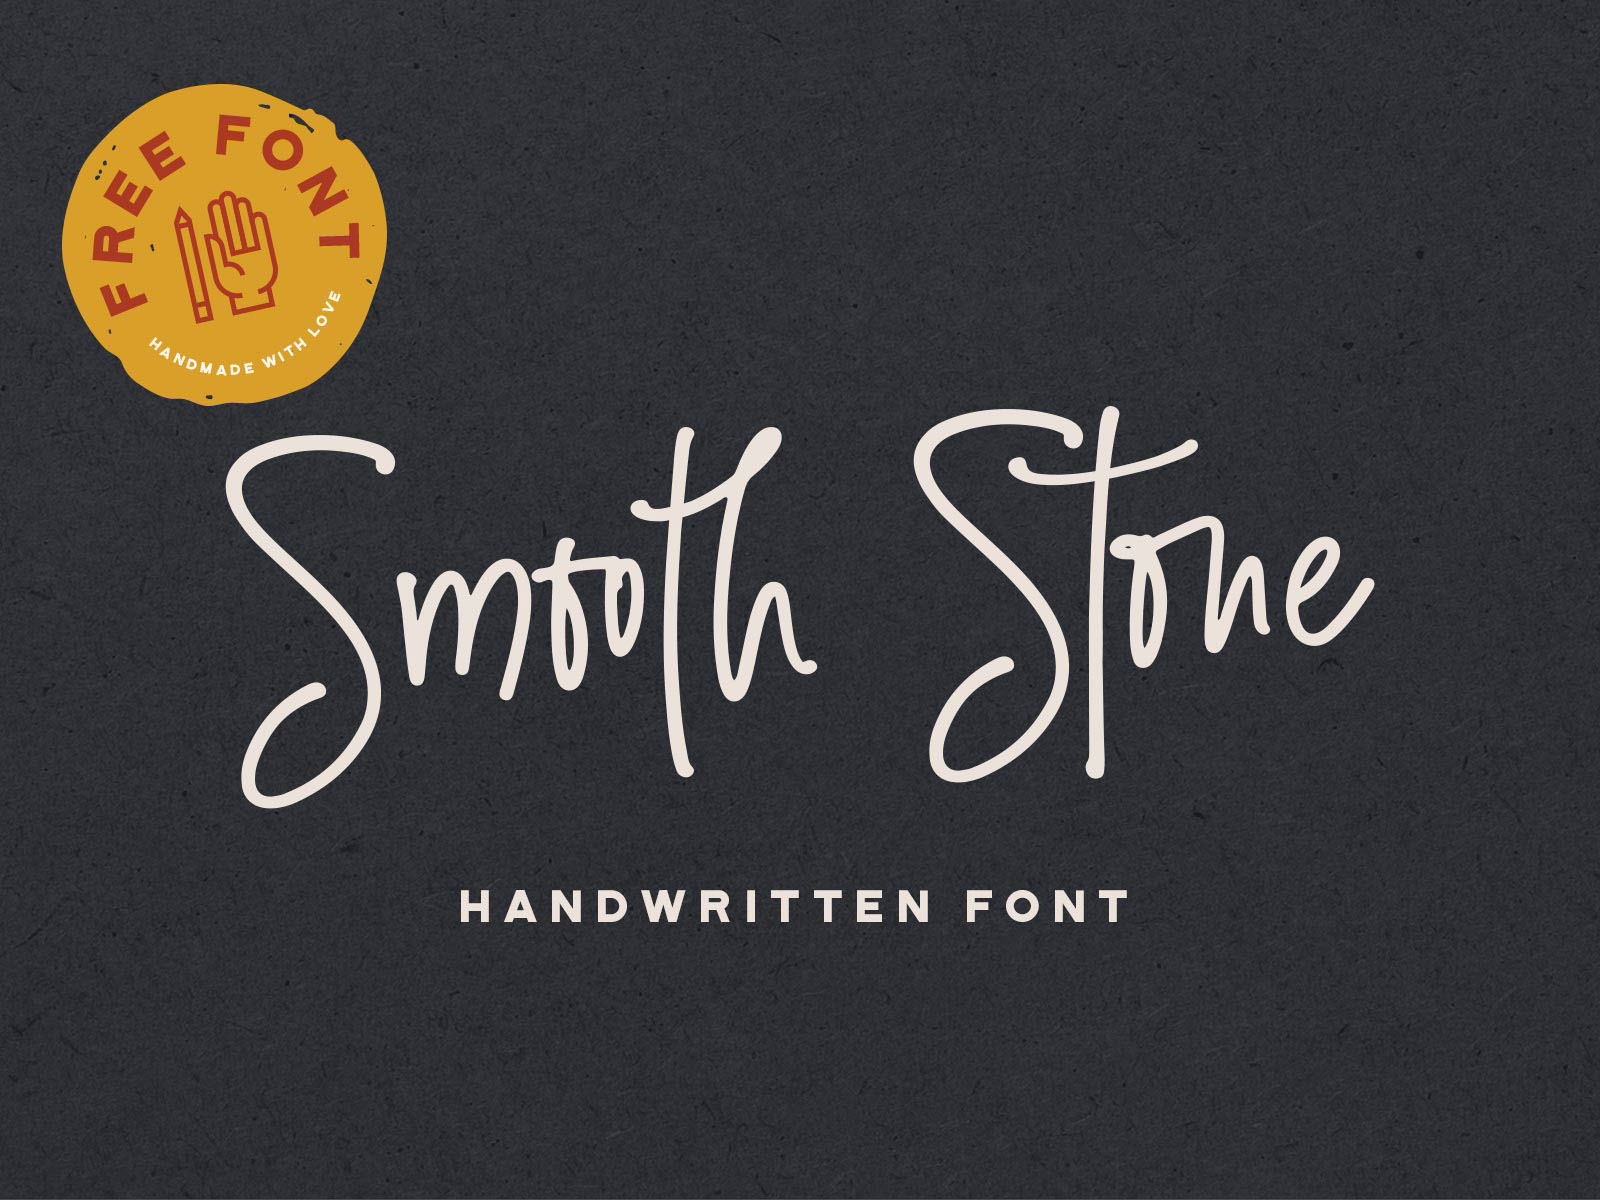 Font Smooth Stone